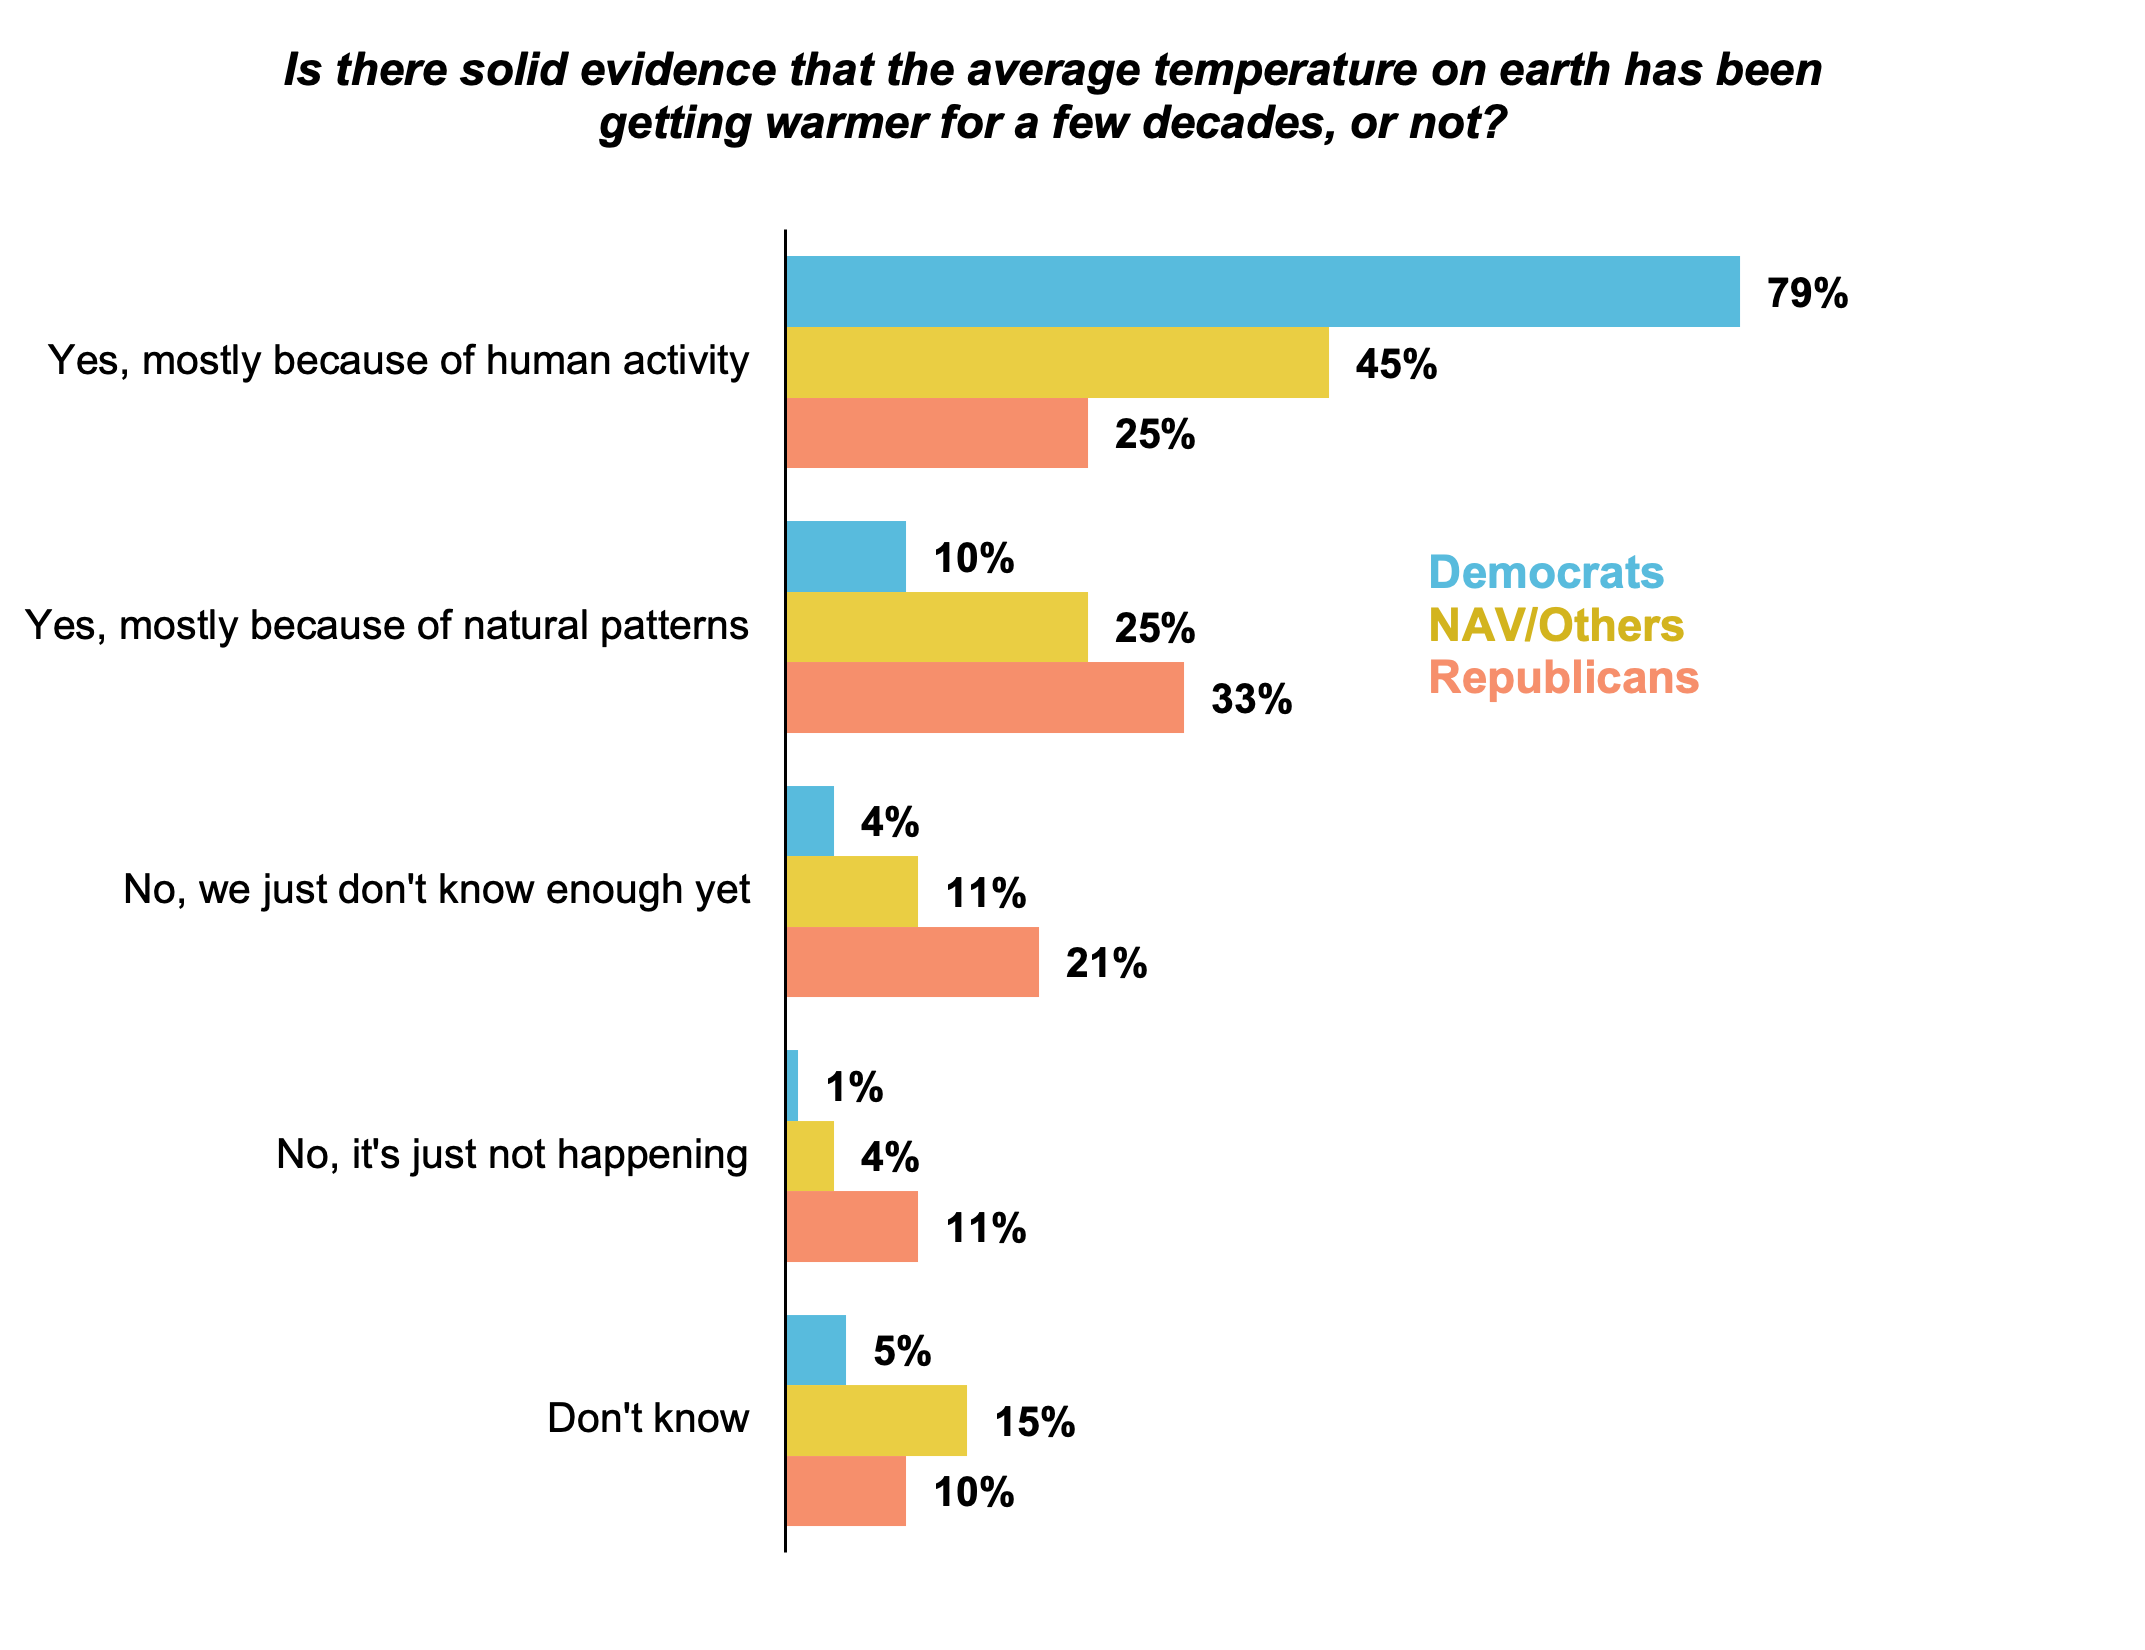 Bar graph results from asking Oregon residents if there is solid evidence that the temperature on Earth has been getting warmer for a few decades or not. Separated by political association.